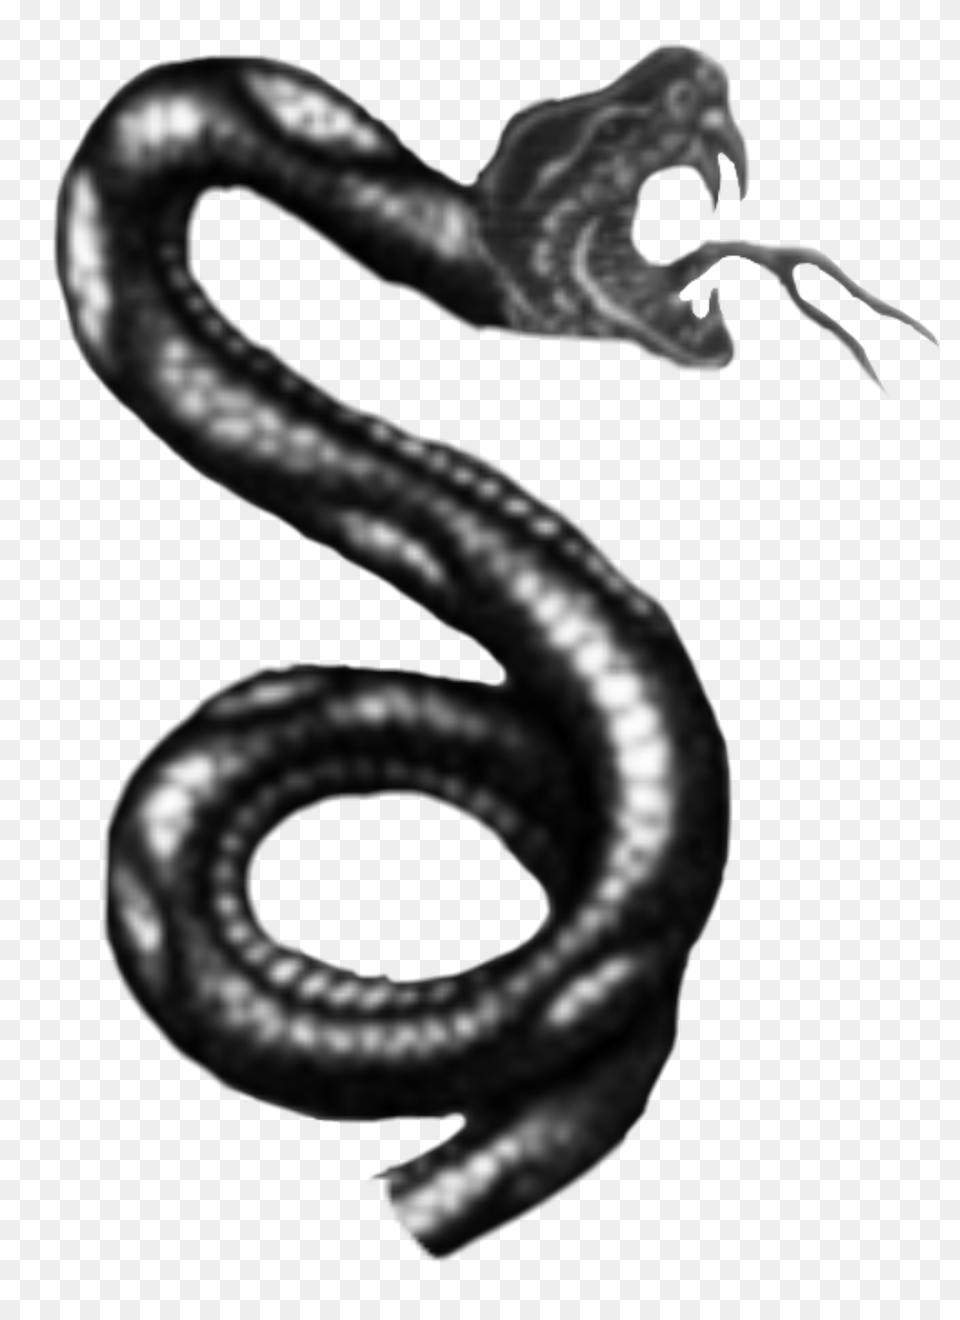 Black And White Snake Tattoo Designs, Animal, Reptile Free Png Download